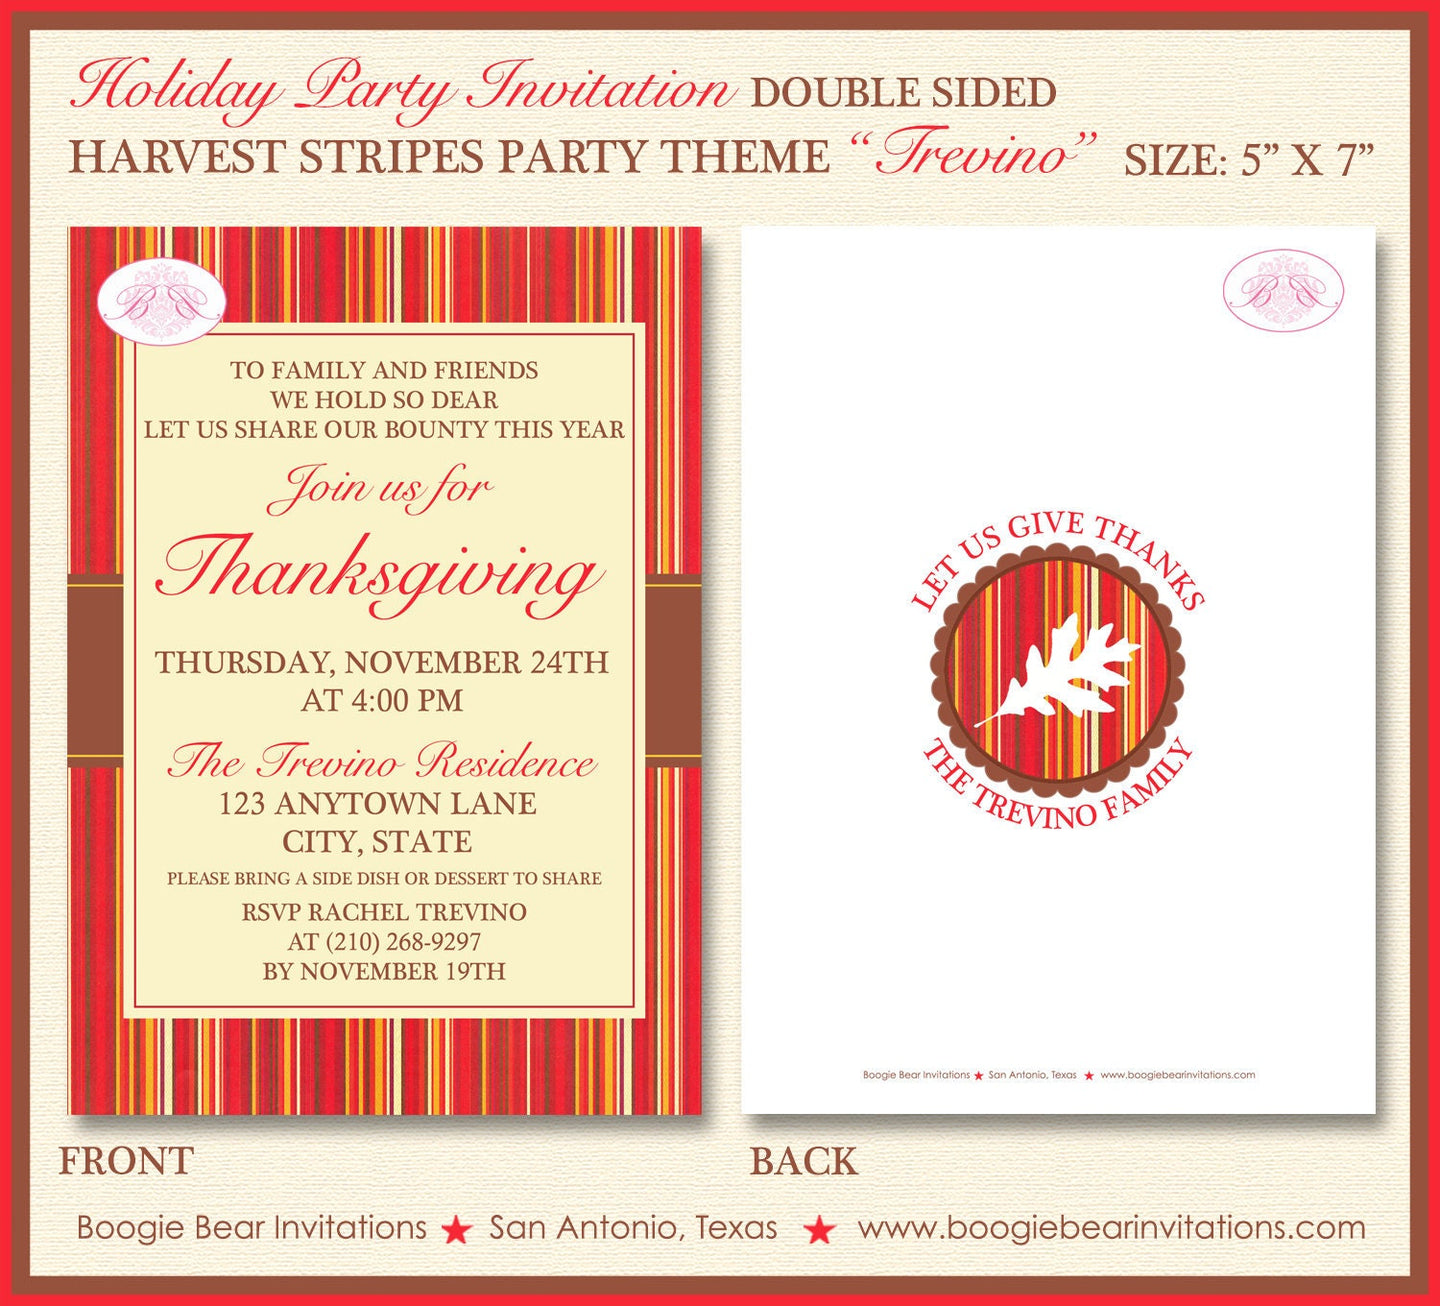 Harvest Stripes Thanksgiving Party Invitation Autumn Leaf Fall Red Brown Boogie Bear Invitations Trevino Theme Paperless Printable Printed